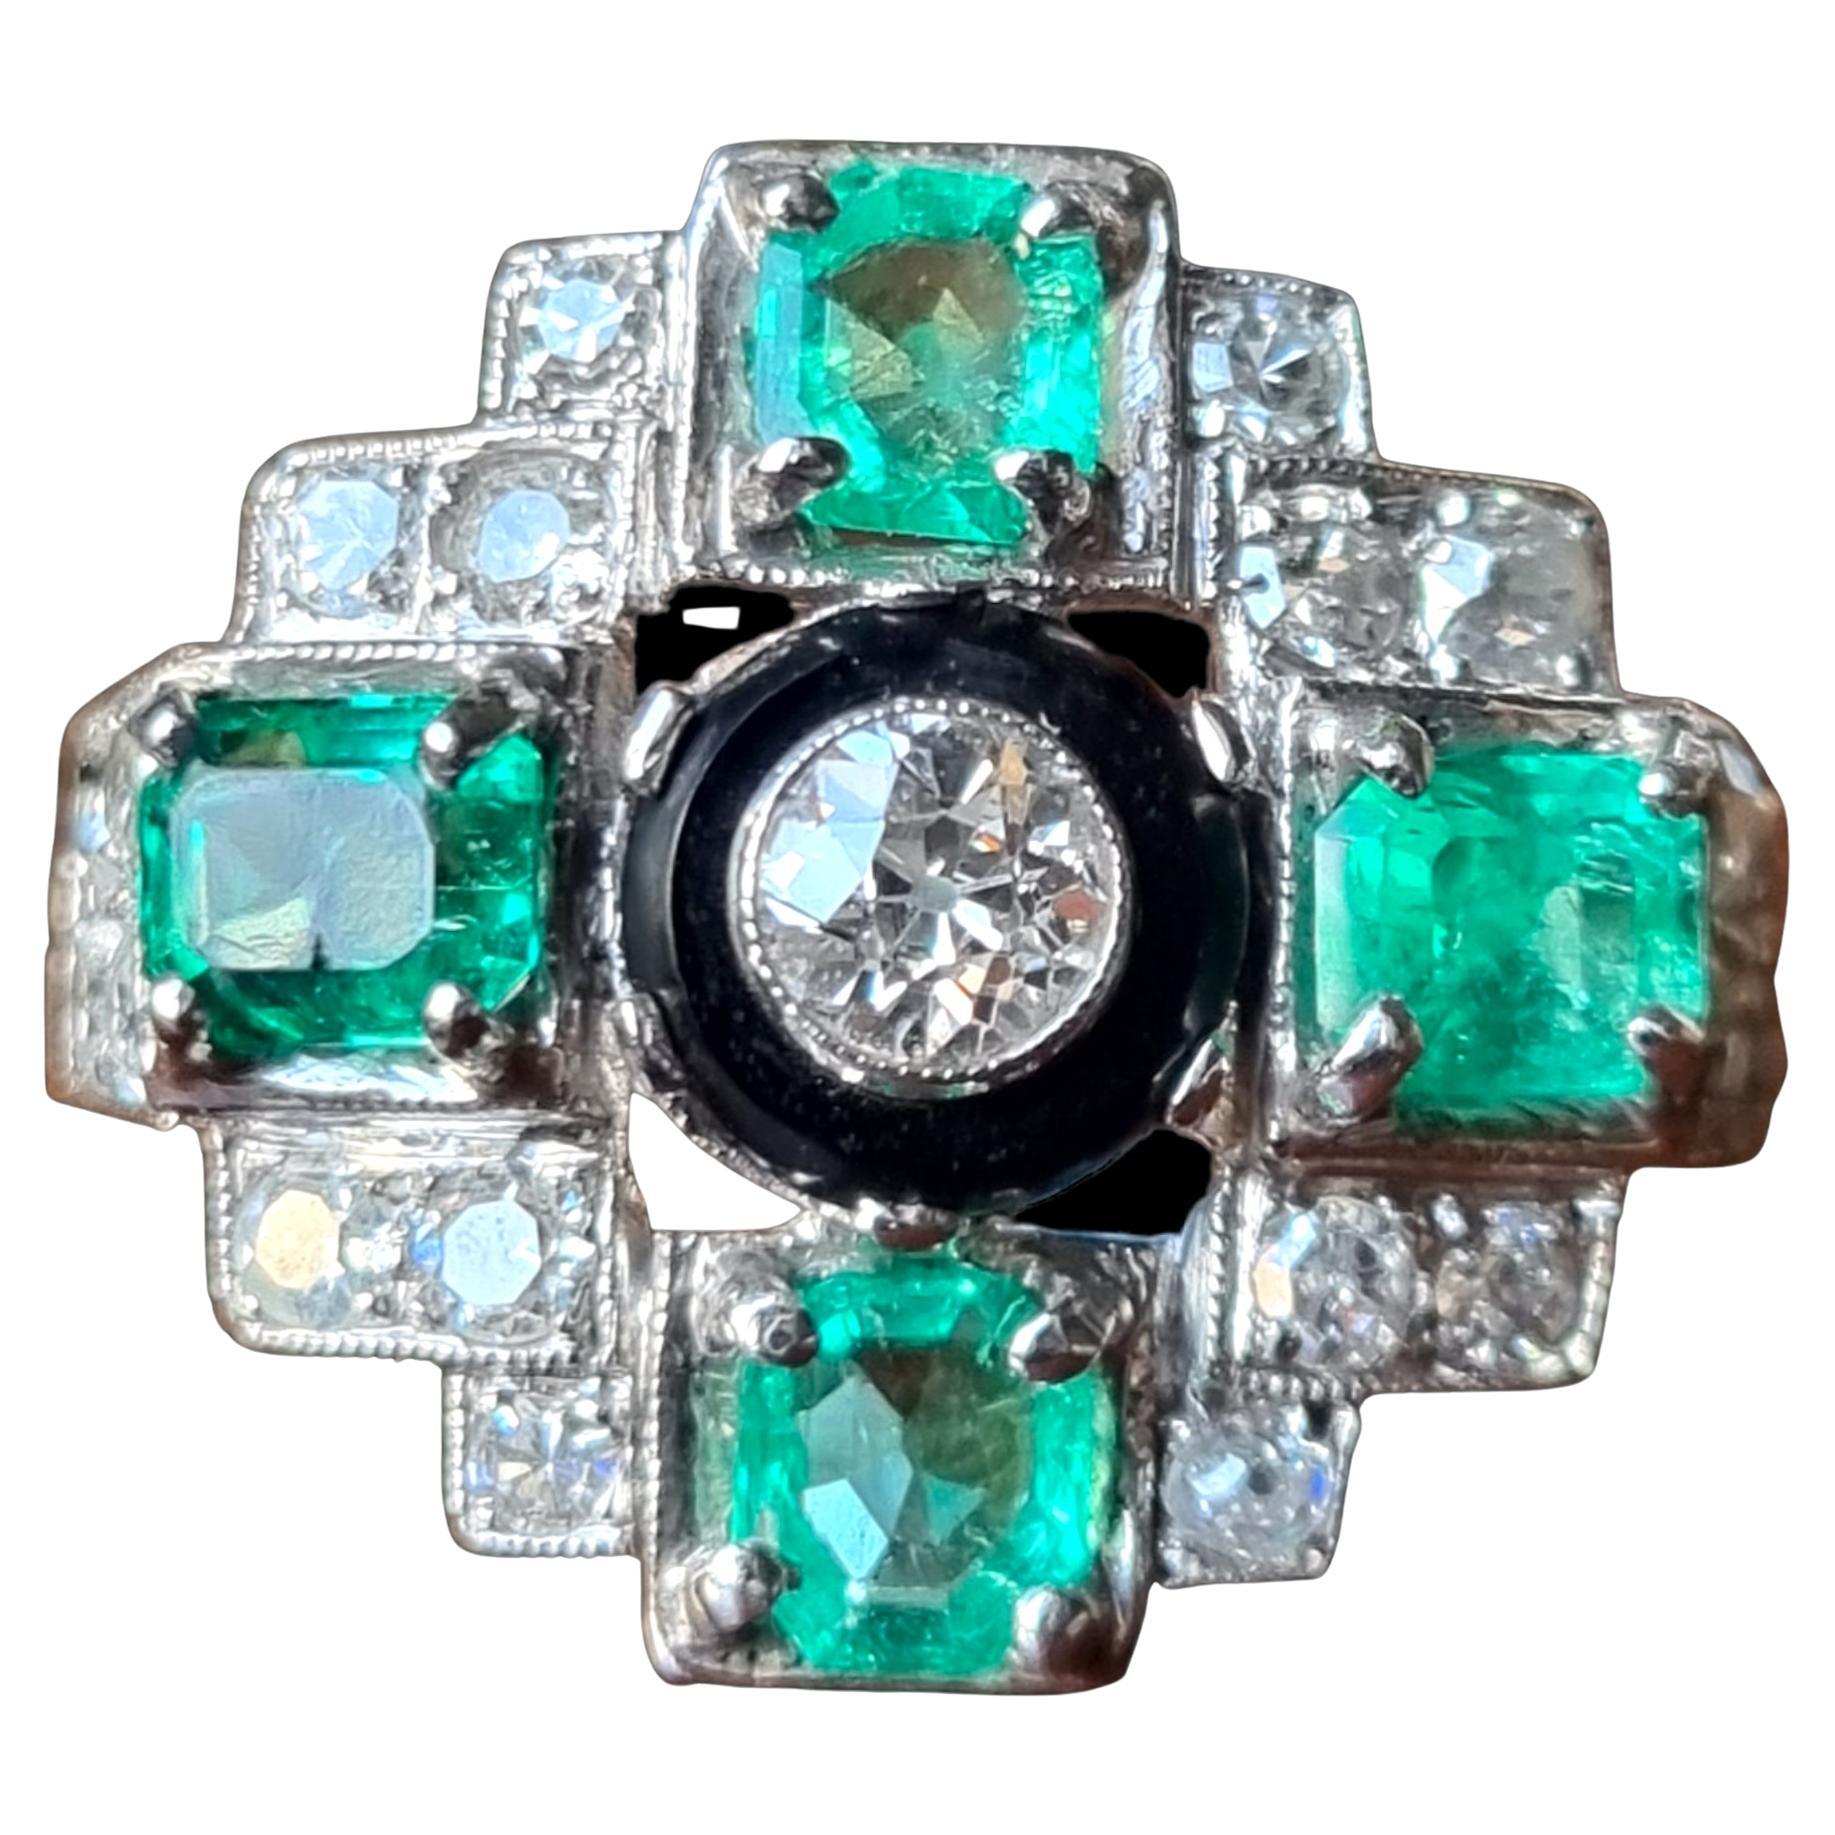 Art-Deco Style Cross Shaped Design Emerald, Diamond and Onyx Cocktail Ring